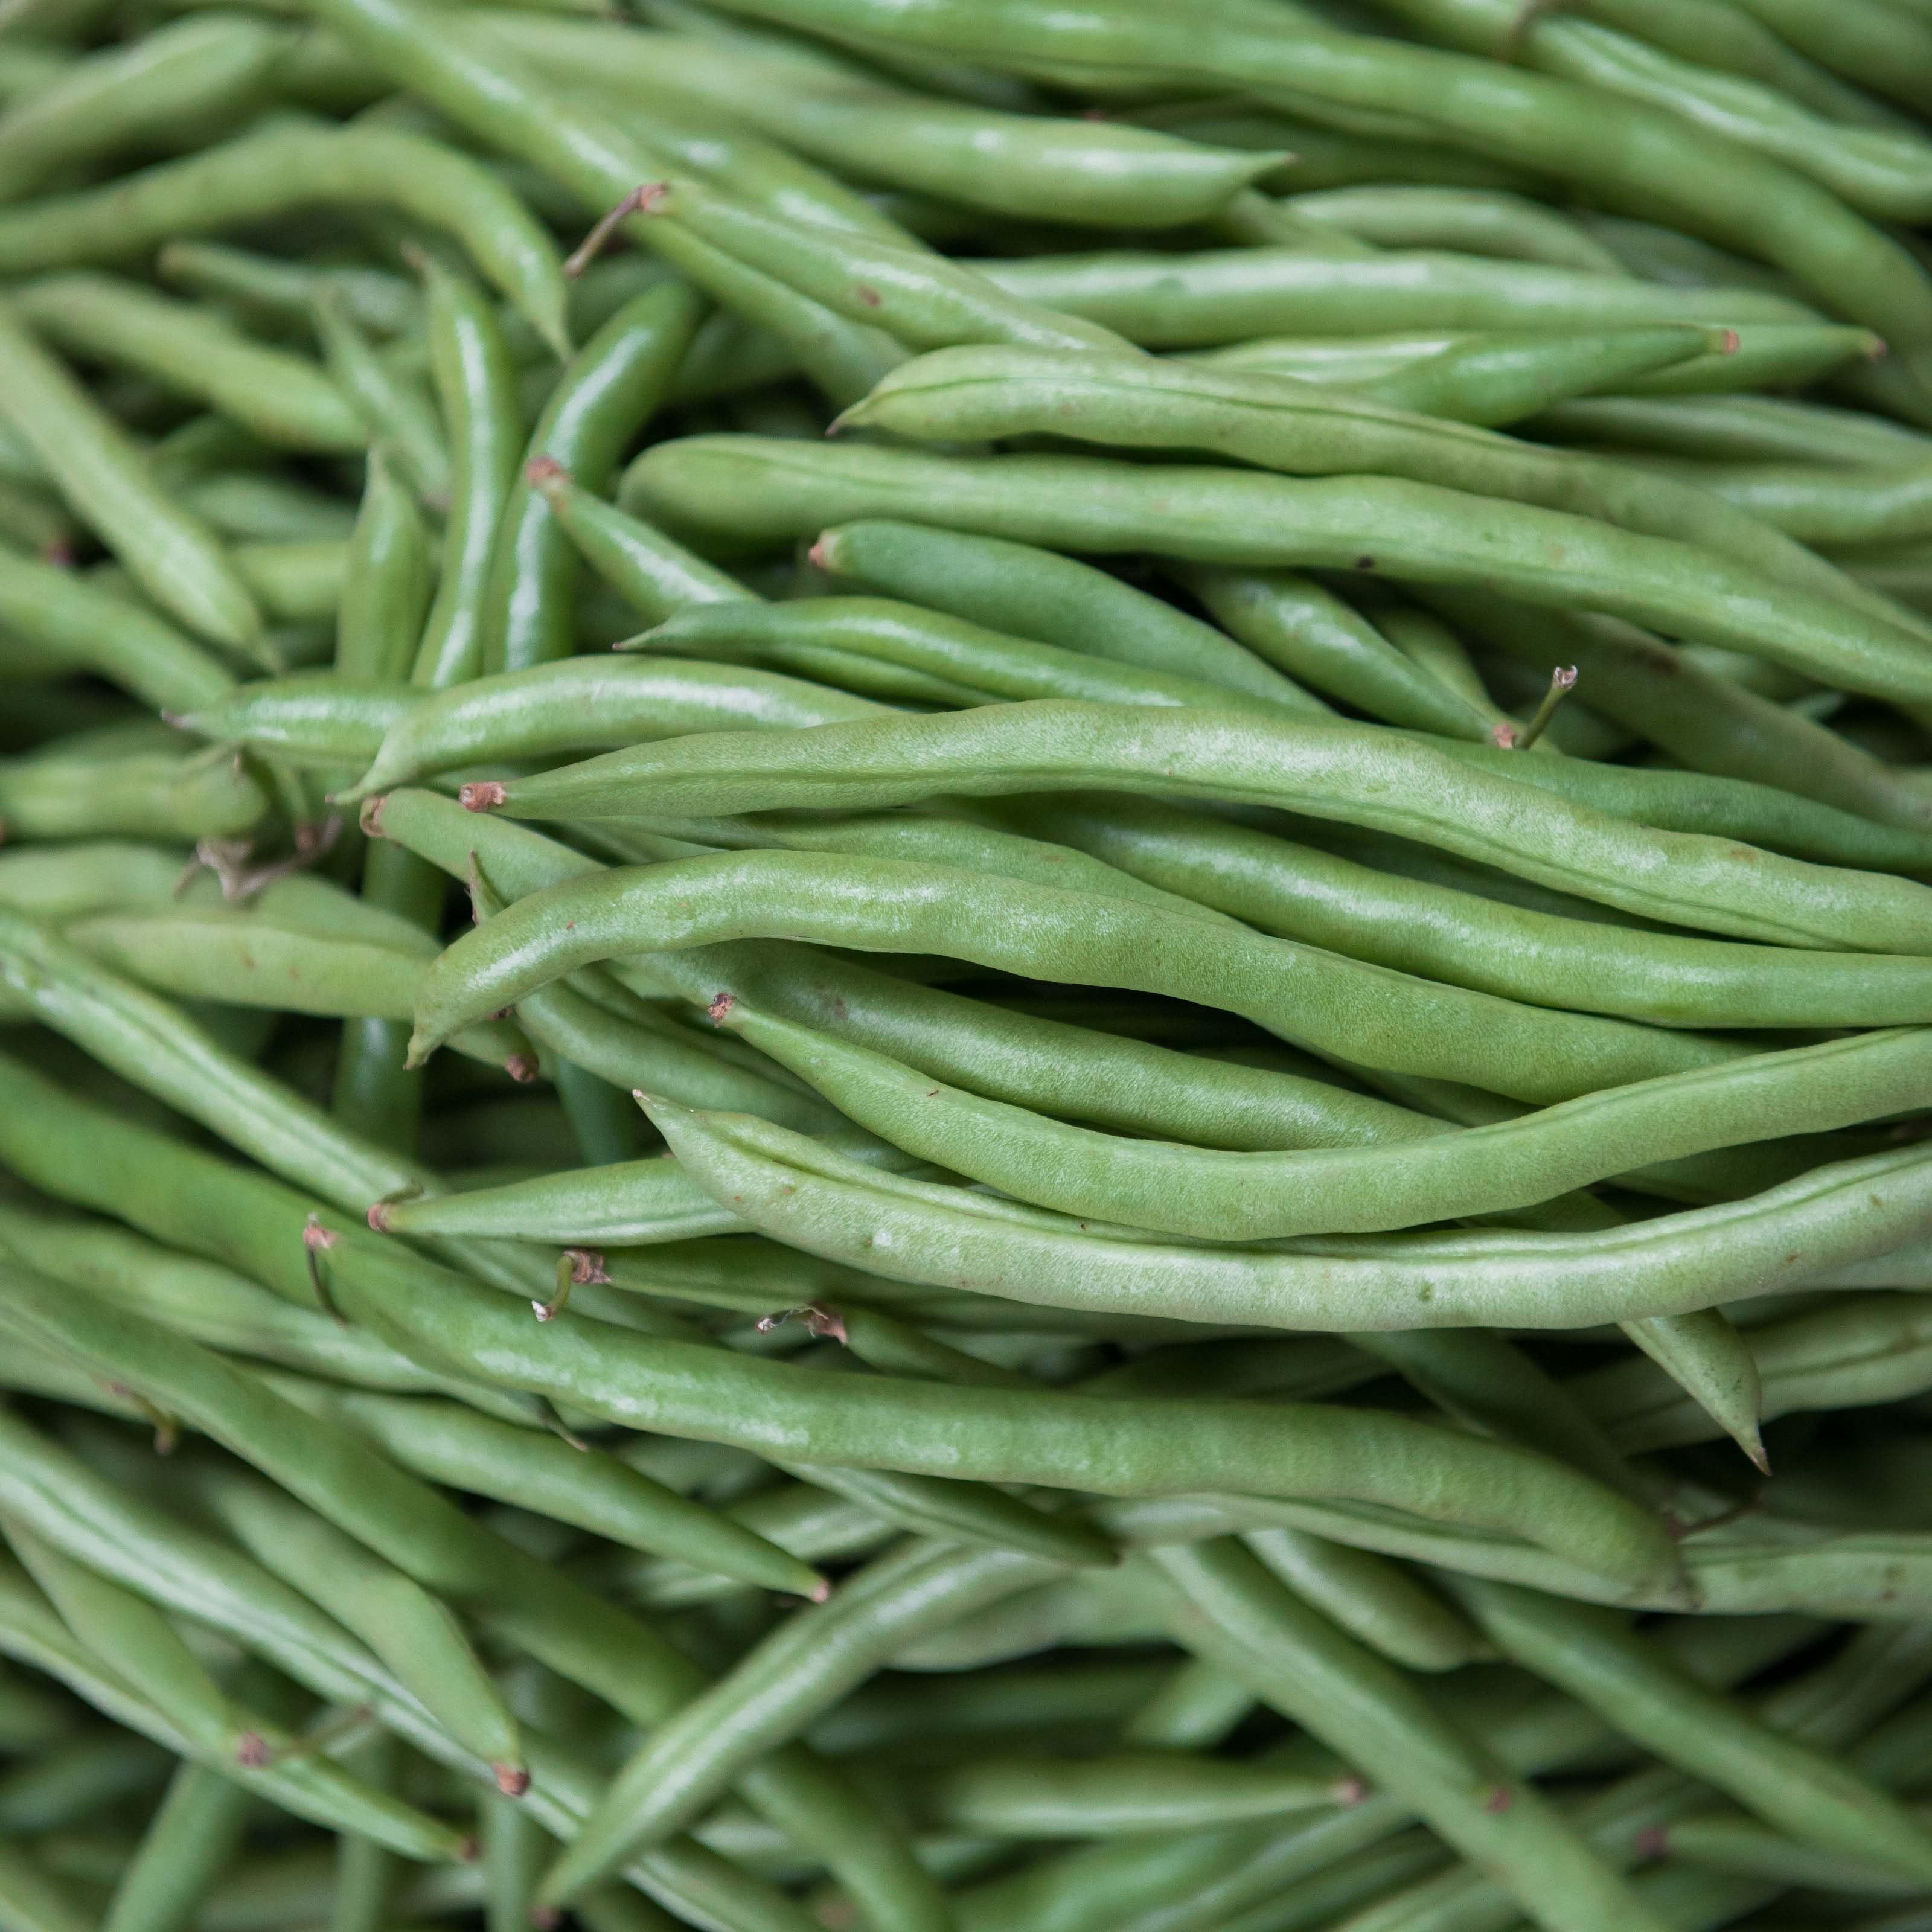 How can you tell if green beans are bad? 